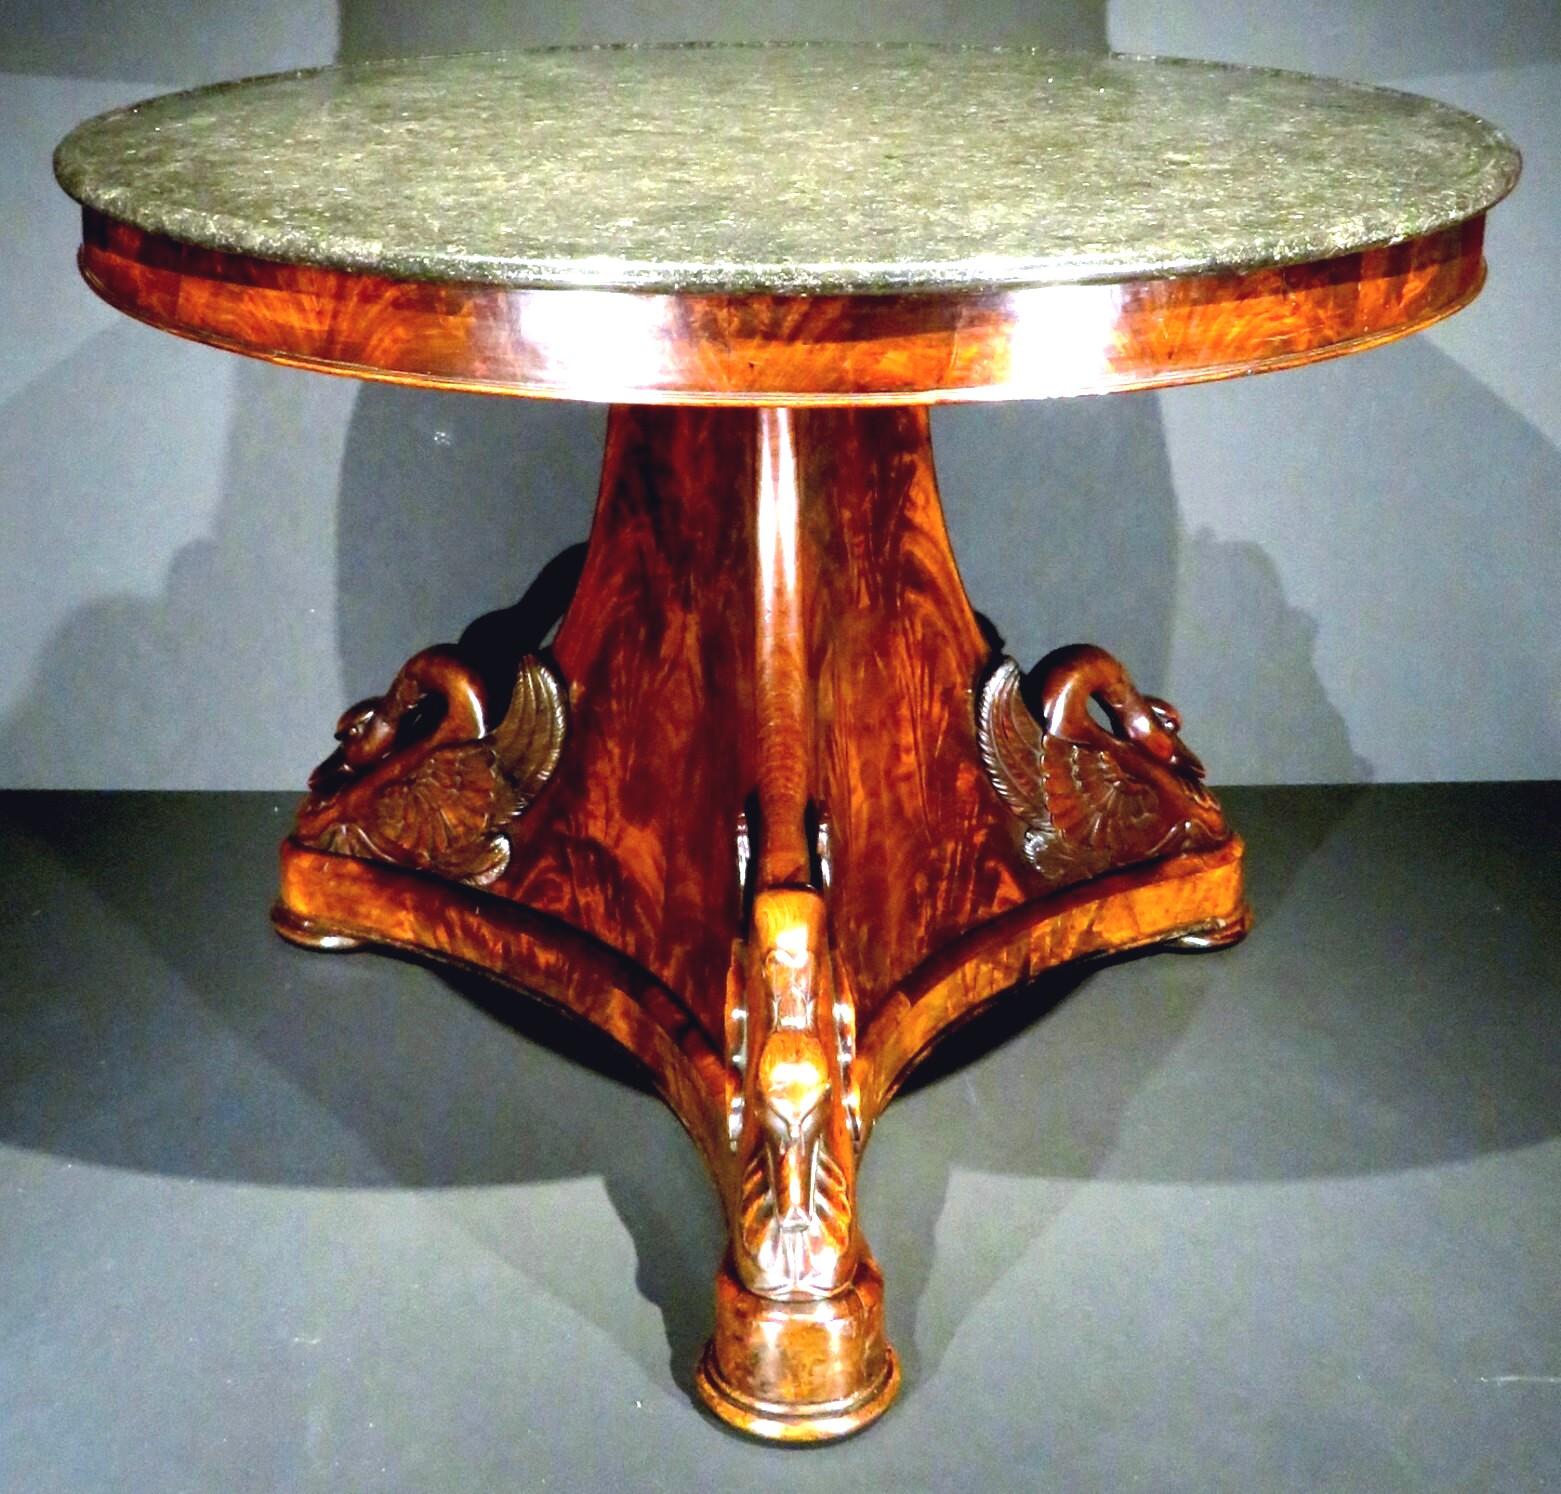 The original fossilized black marble circular top over a conforming frieze of richly figured crotch mahogany, mounted upon a stunning flame-mahogany tri-corner base accented with three individual hand carved & applied swan-shaped elements, raised